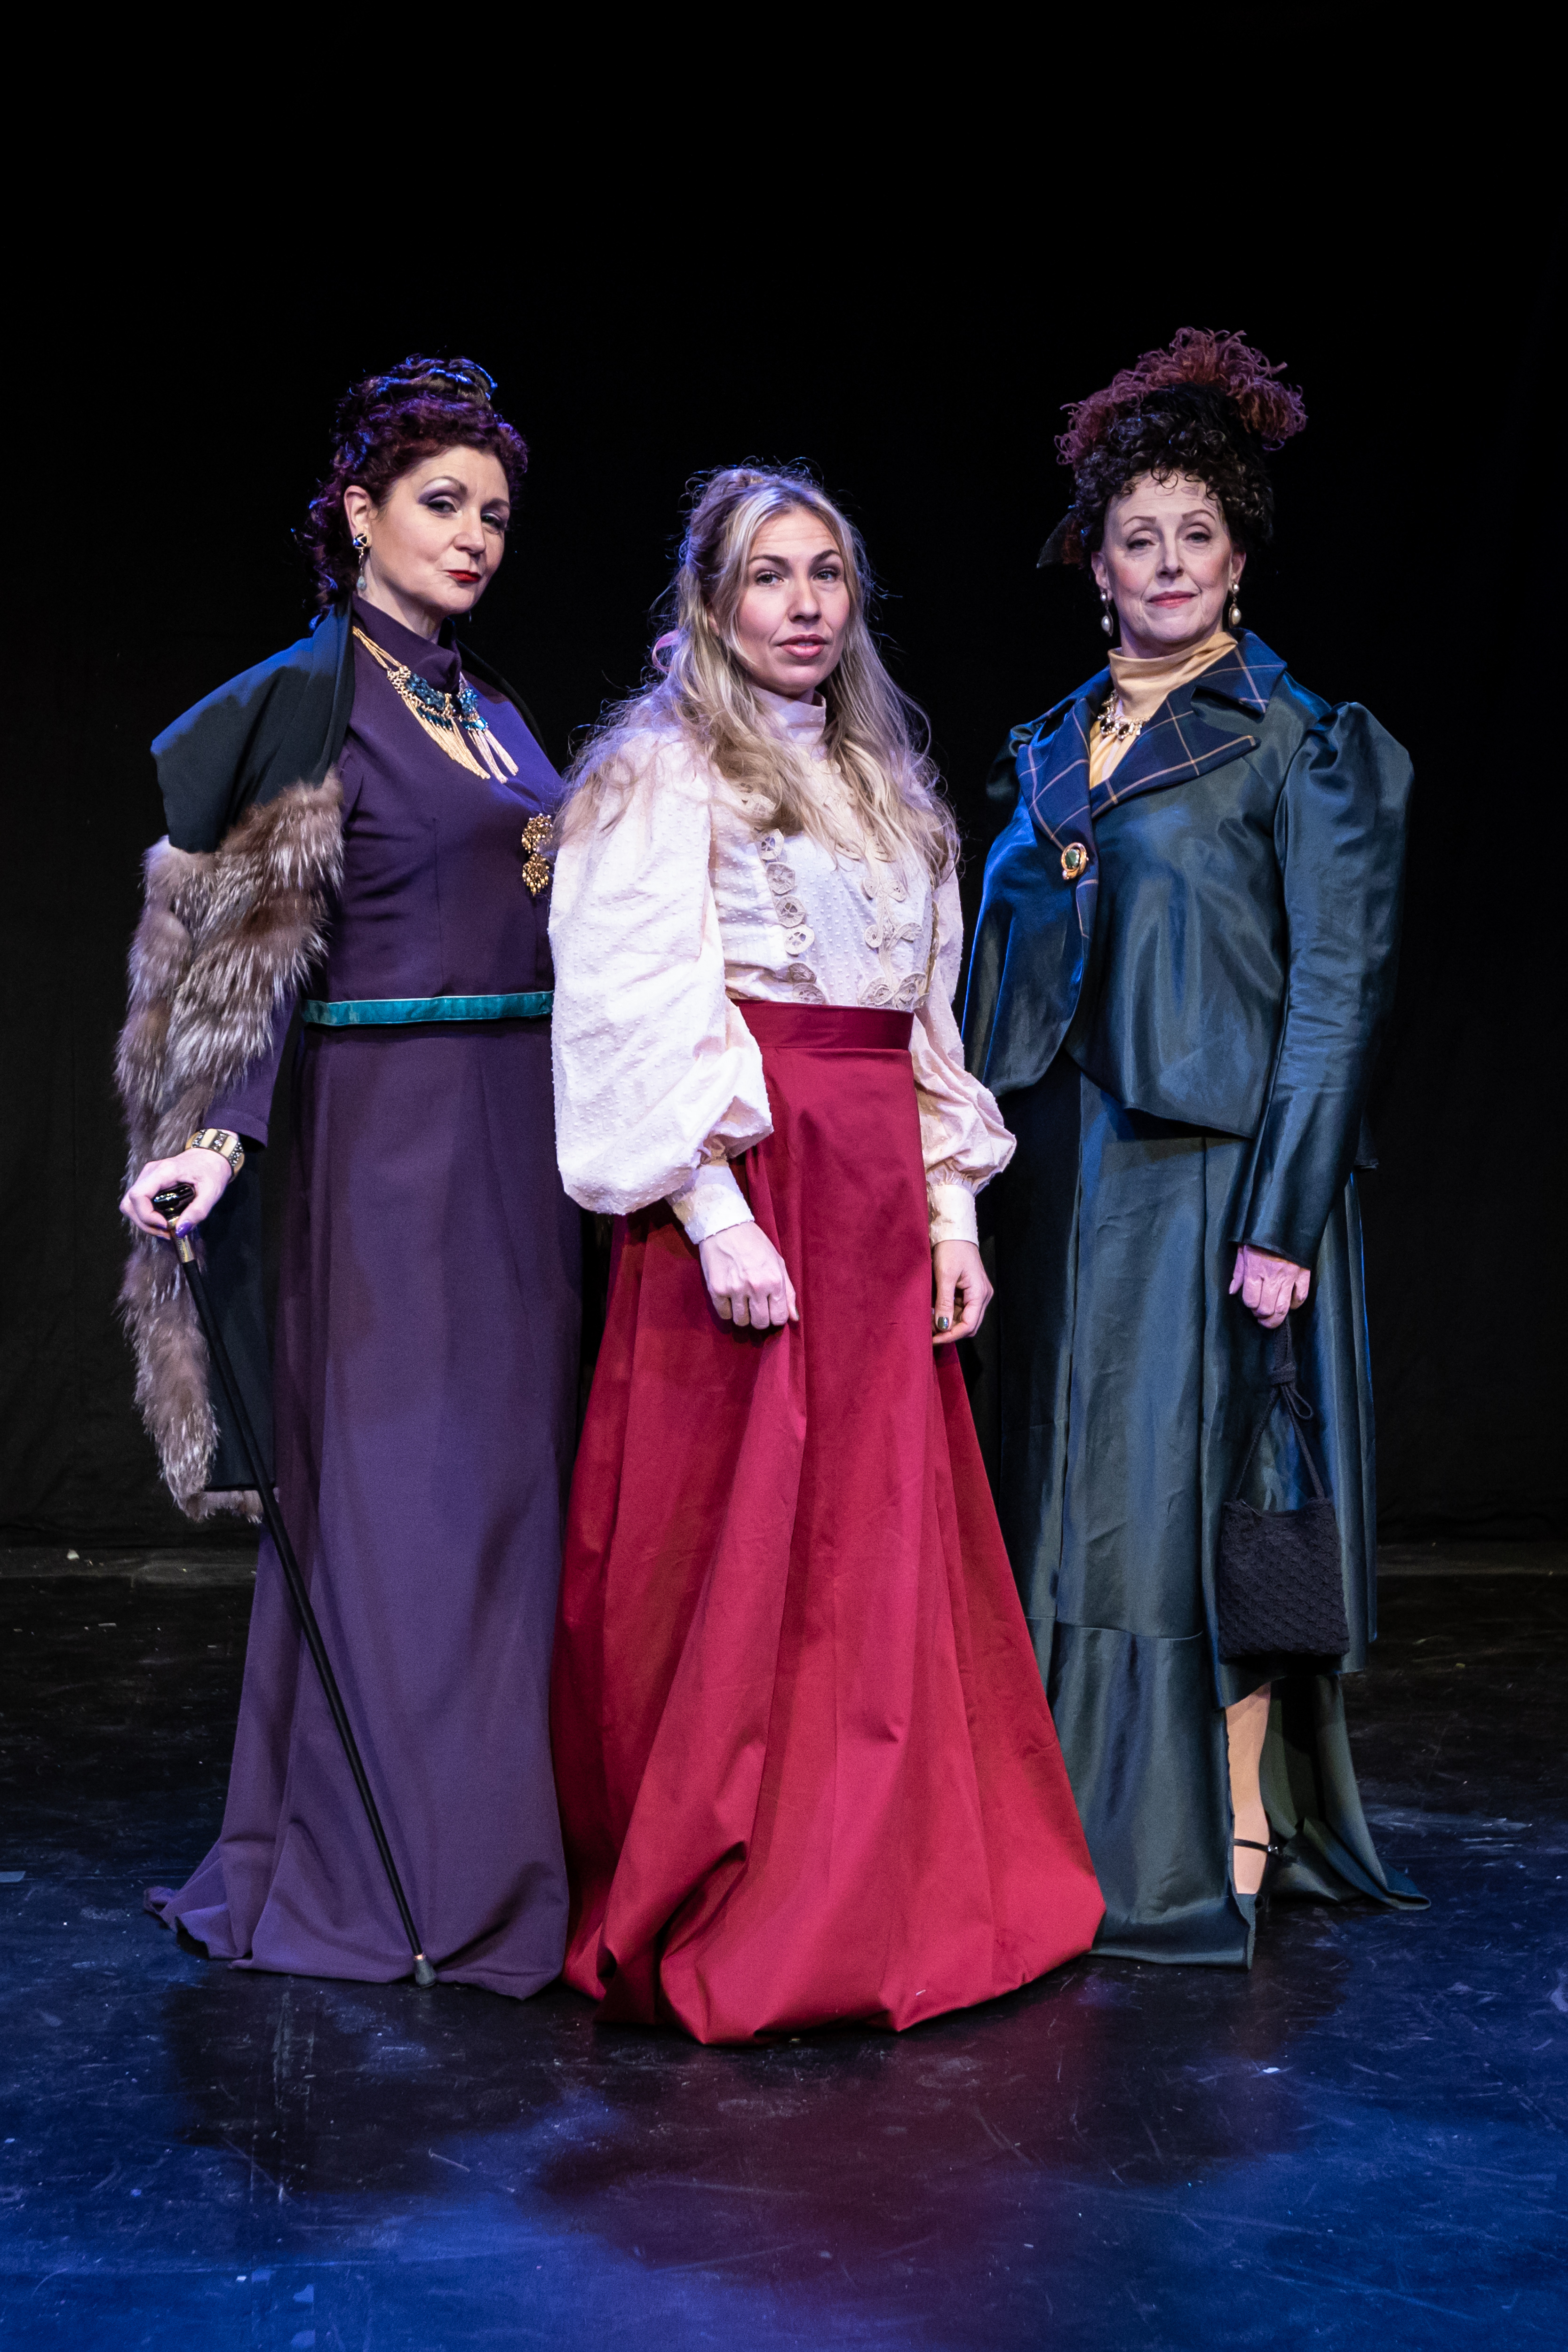 The Three Sirens of Portland, Oregon in 1880.
Liverpool Liz [Lisamarie Harrison], Nancy Boggs [Danielle Valentine] and Mary Cook [Cyndy Ramsey-Rier
Photo by Kinderpics